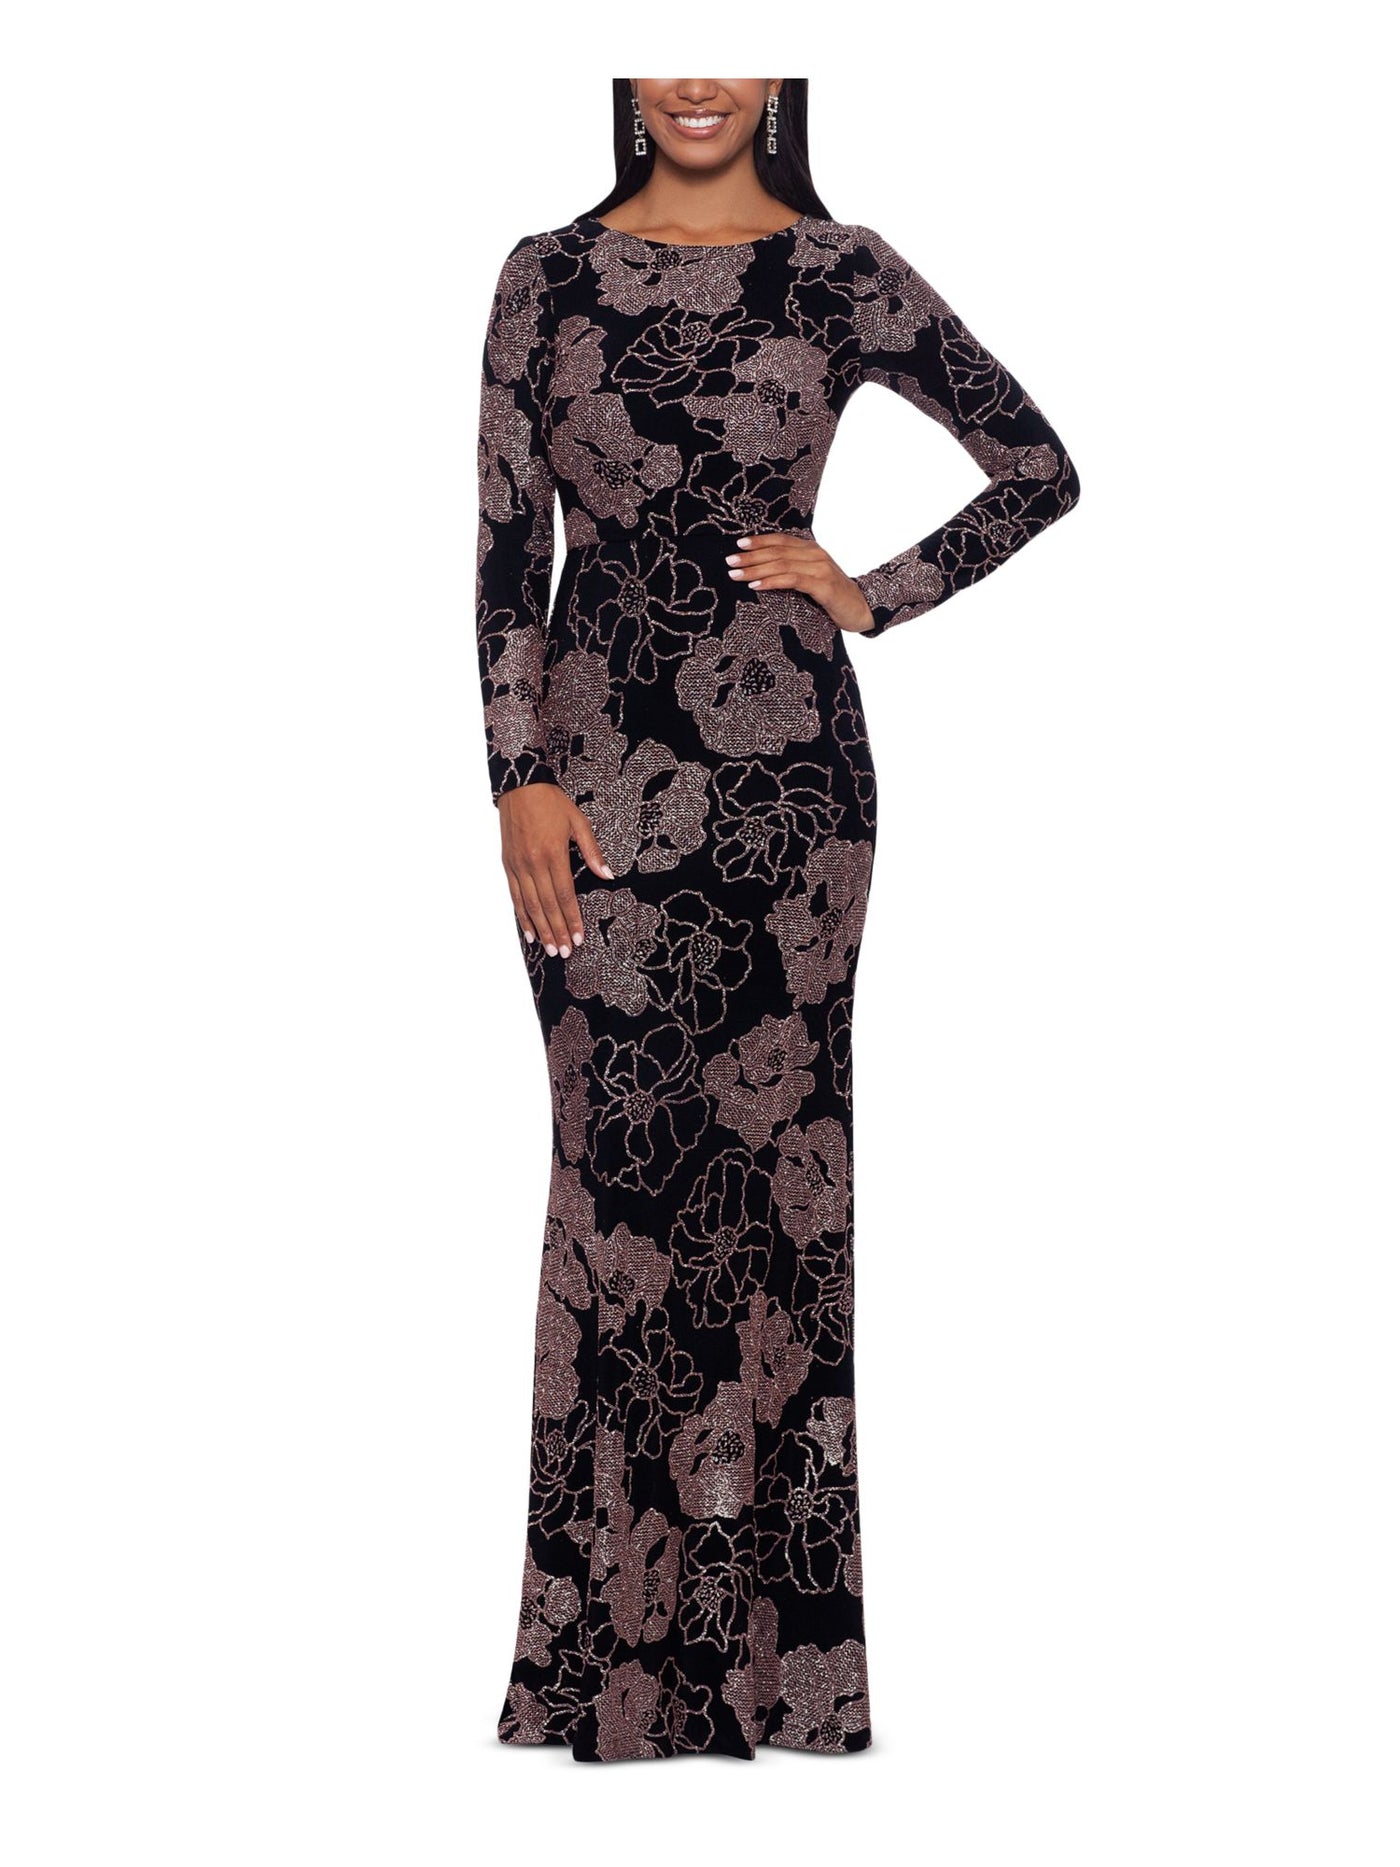 B&A  BY BETSY & ADAM Womens Black Metallic Zippered Lined Floral Long Sleeve Boat Neck Full-Length Formal Gown Dress 4